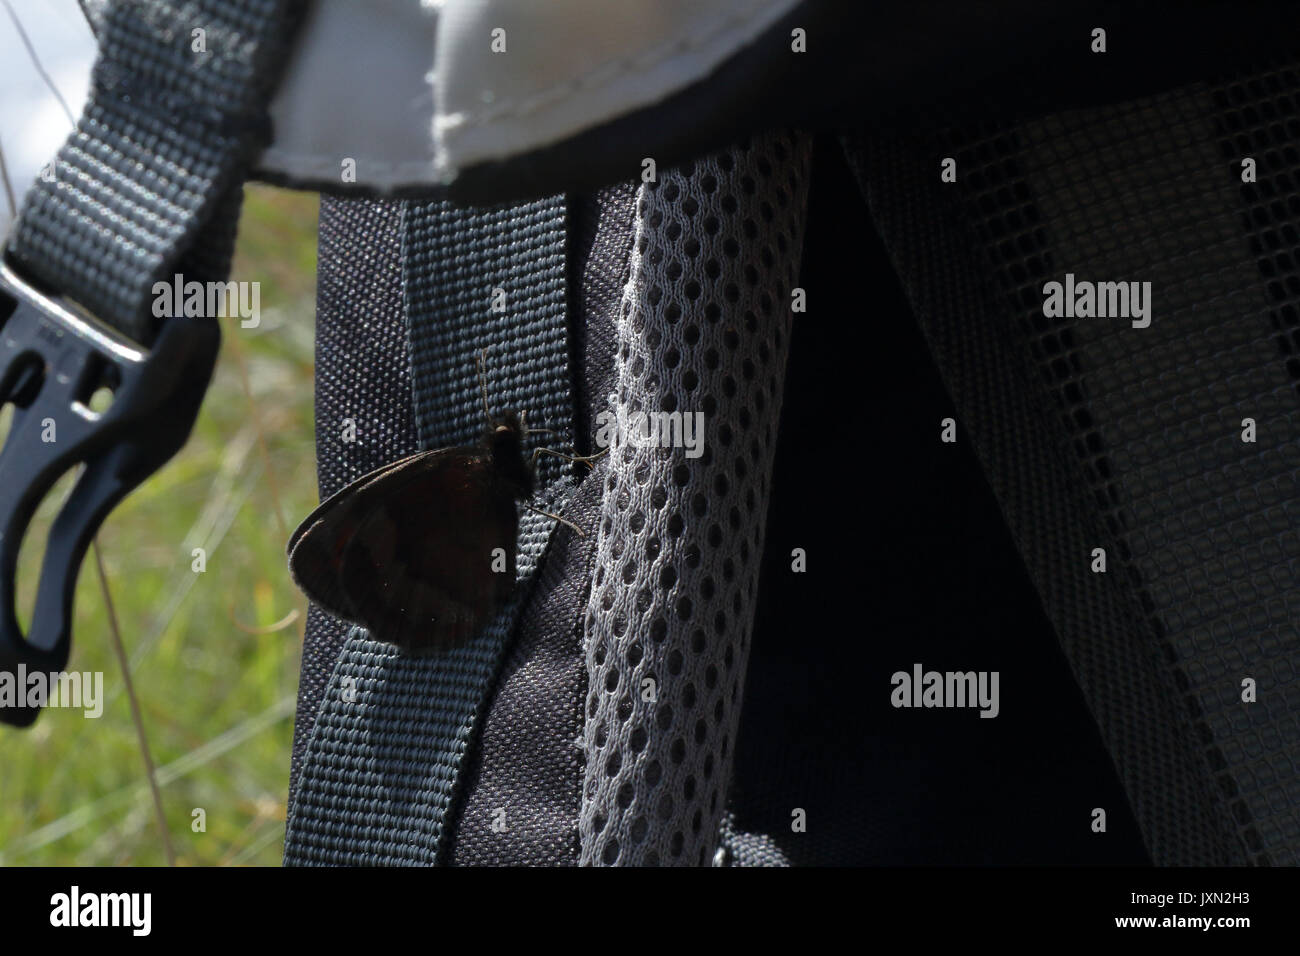 A dark brown butterfly perched on the strap of a dark grey bagpack Stock Photo